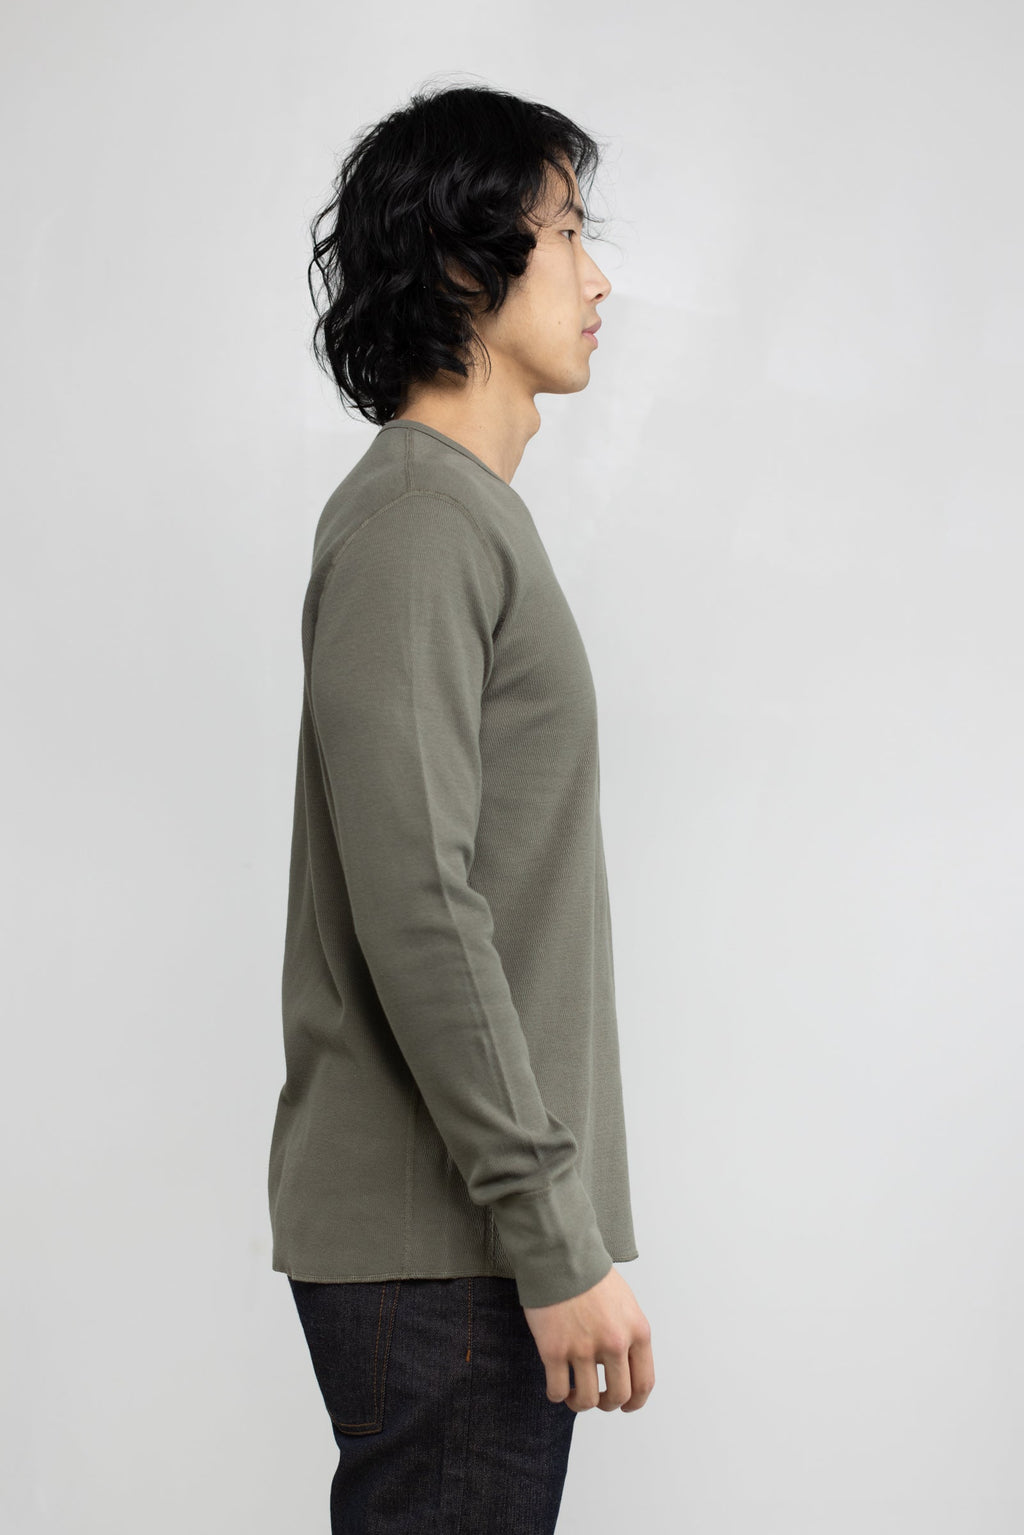 Mesh Thermal L/S Crew in Army Green 04